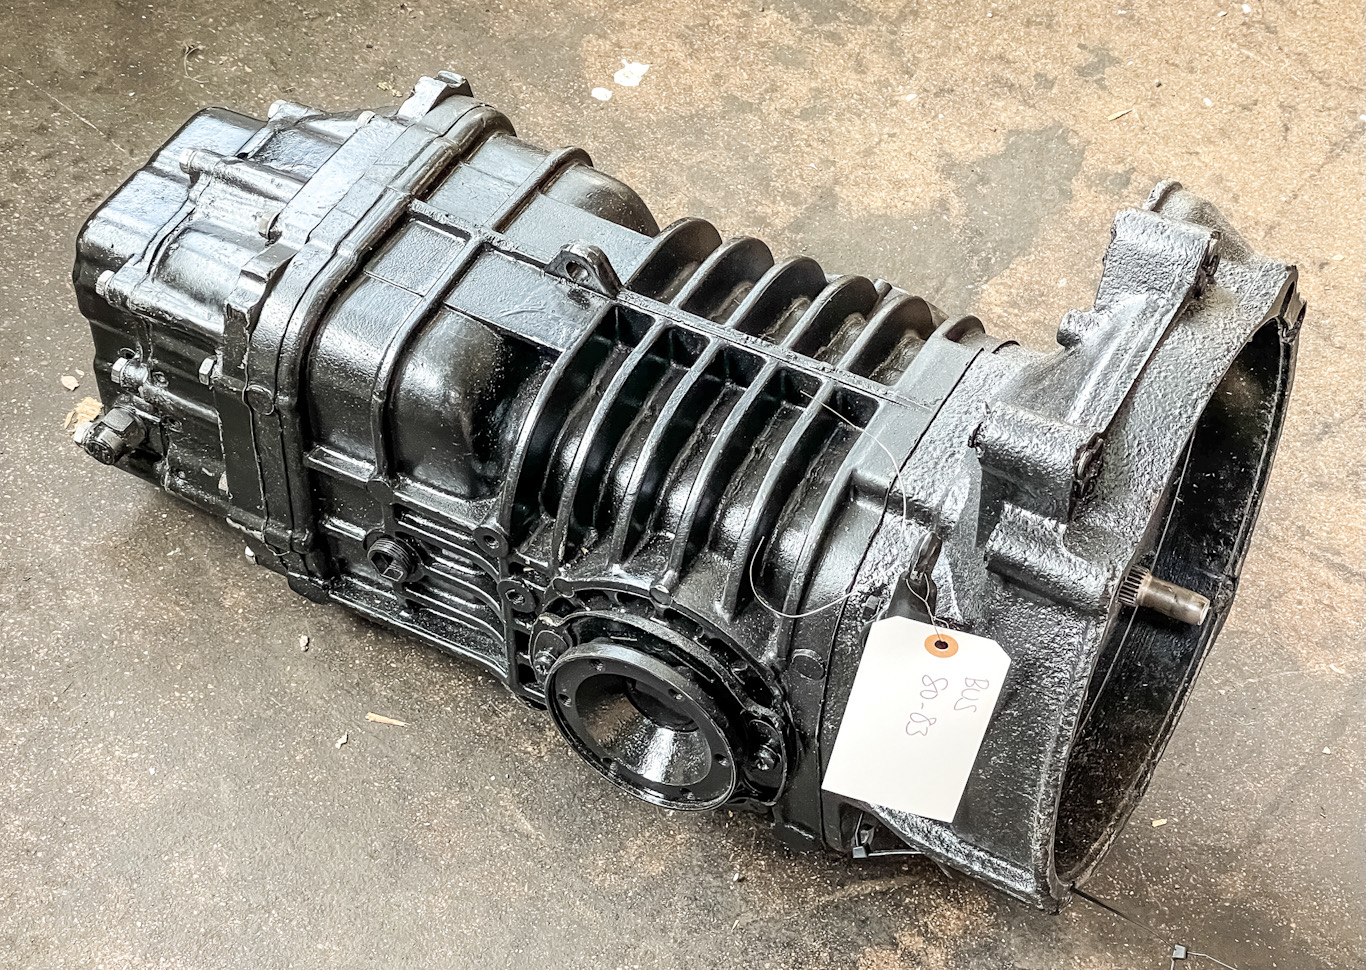 ONE IN STOCK! SHIPS SAME DAY! Rebuilt Transmission VW Bus Type 2 1980-1983 Models Only